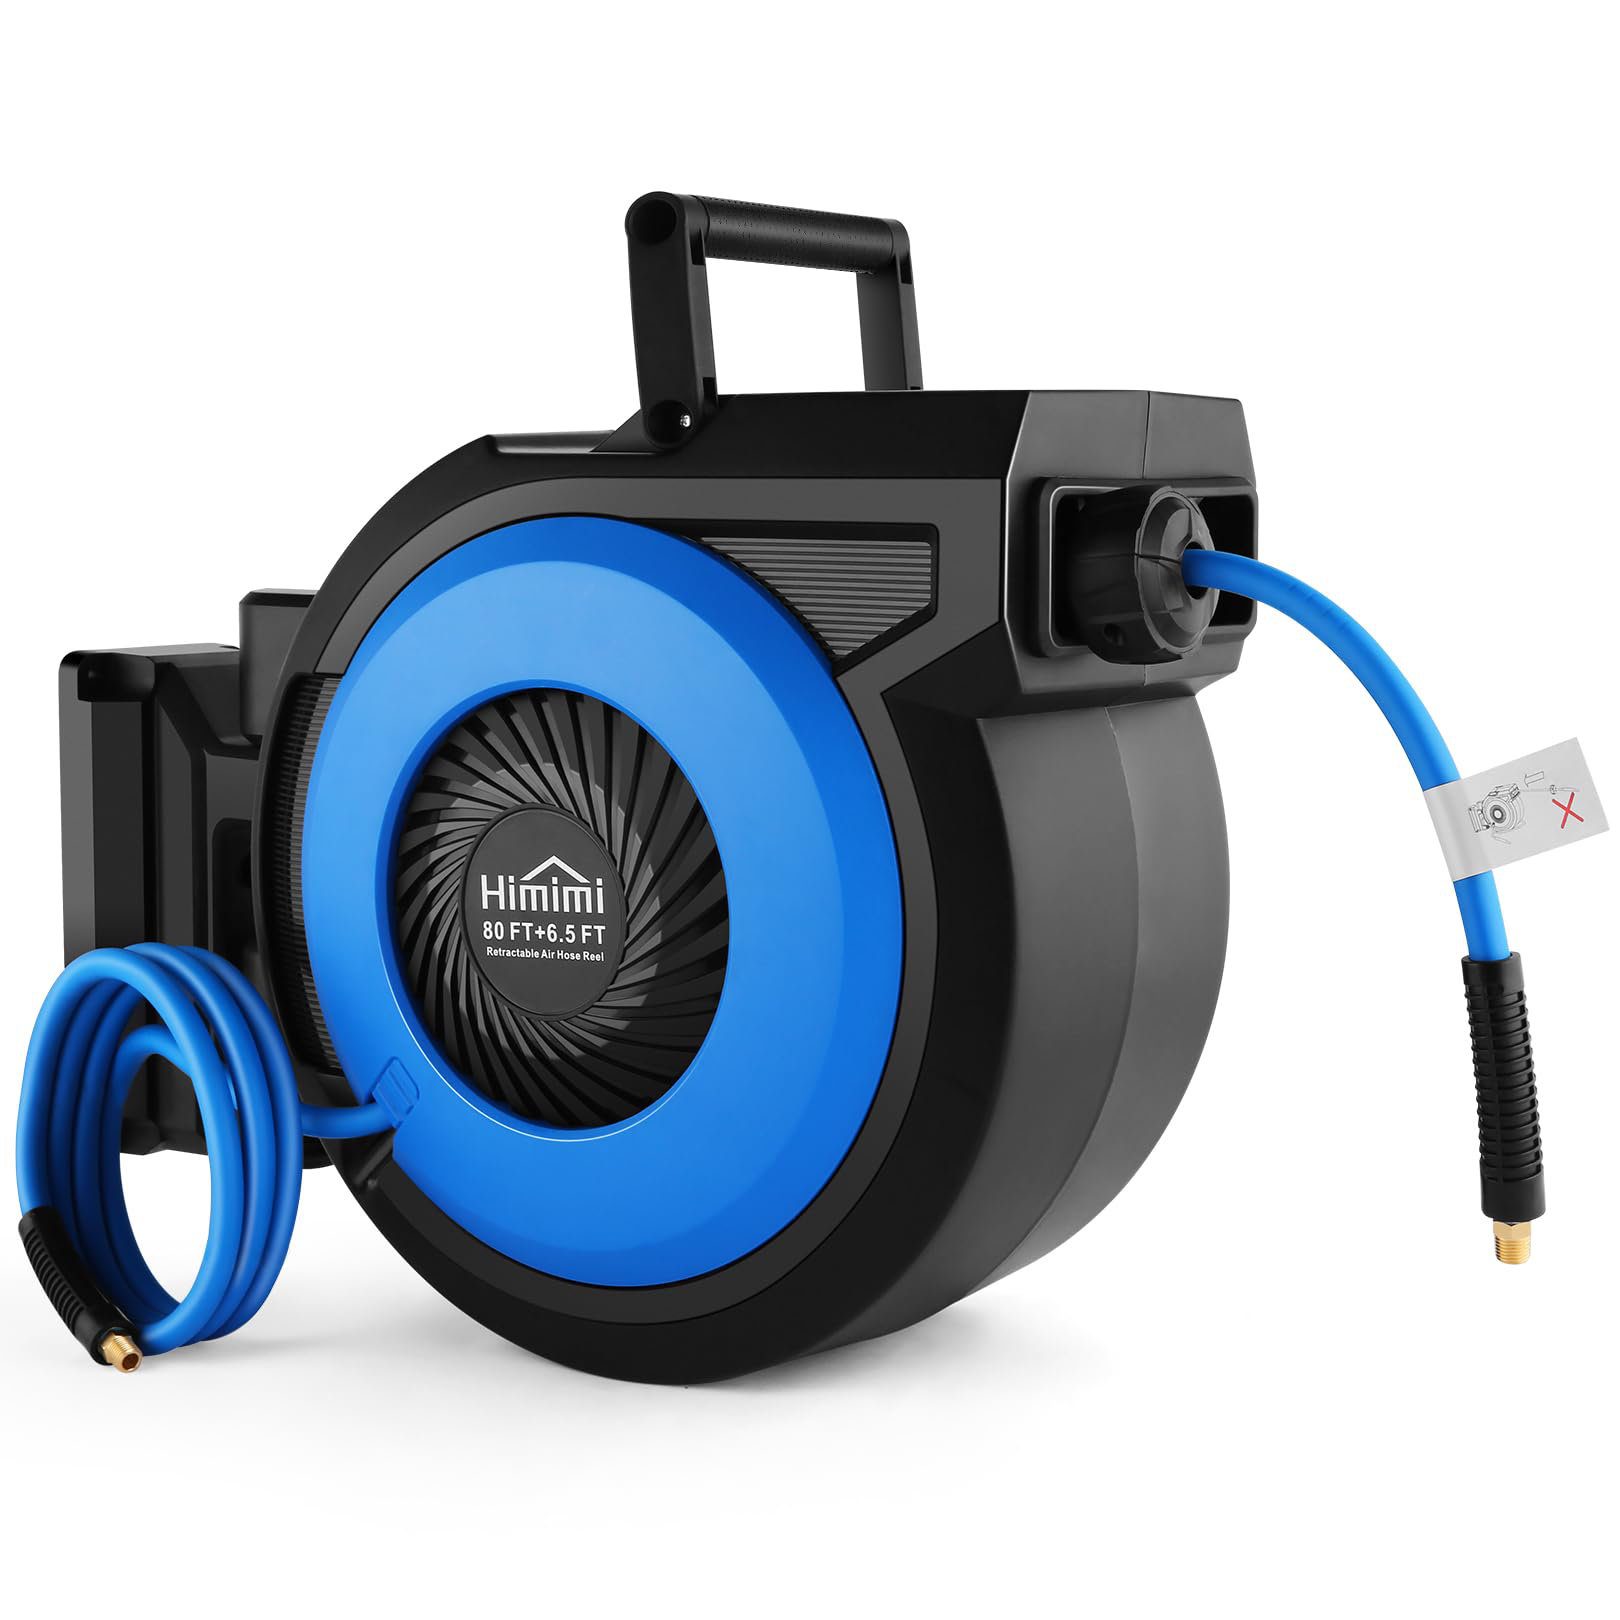 Automatic Hose Reels, Garden Hose Reel, 180 ° Swivel Wall Hose Box,  Retractable Hose Reel, Equipped with Adjustable Nozzle and System Parts